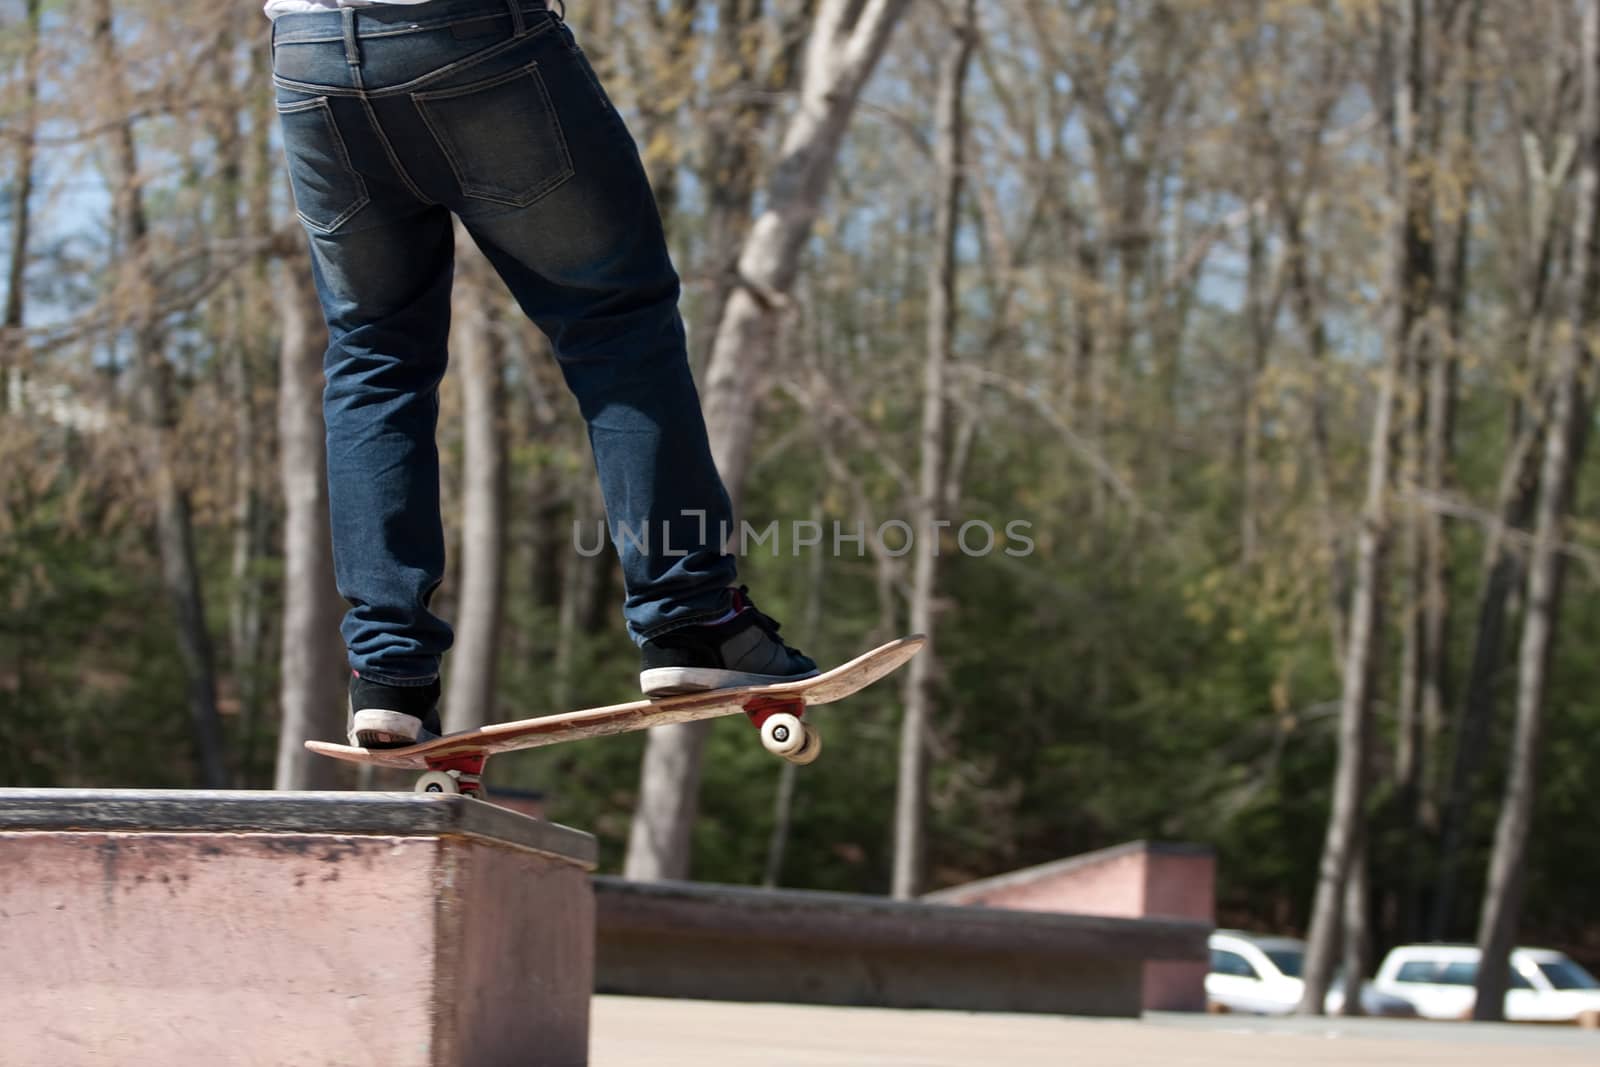 Action shot of a skateboarder skating at the park on a concrete rail.